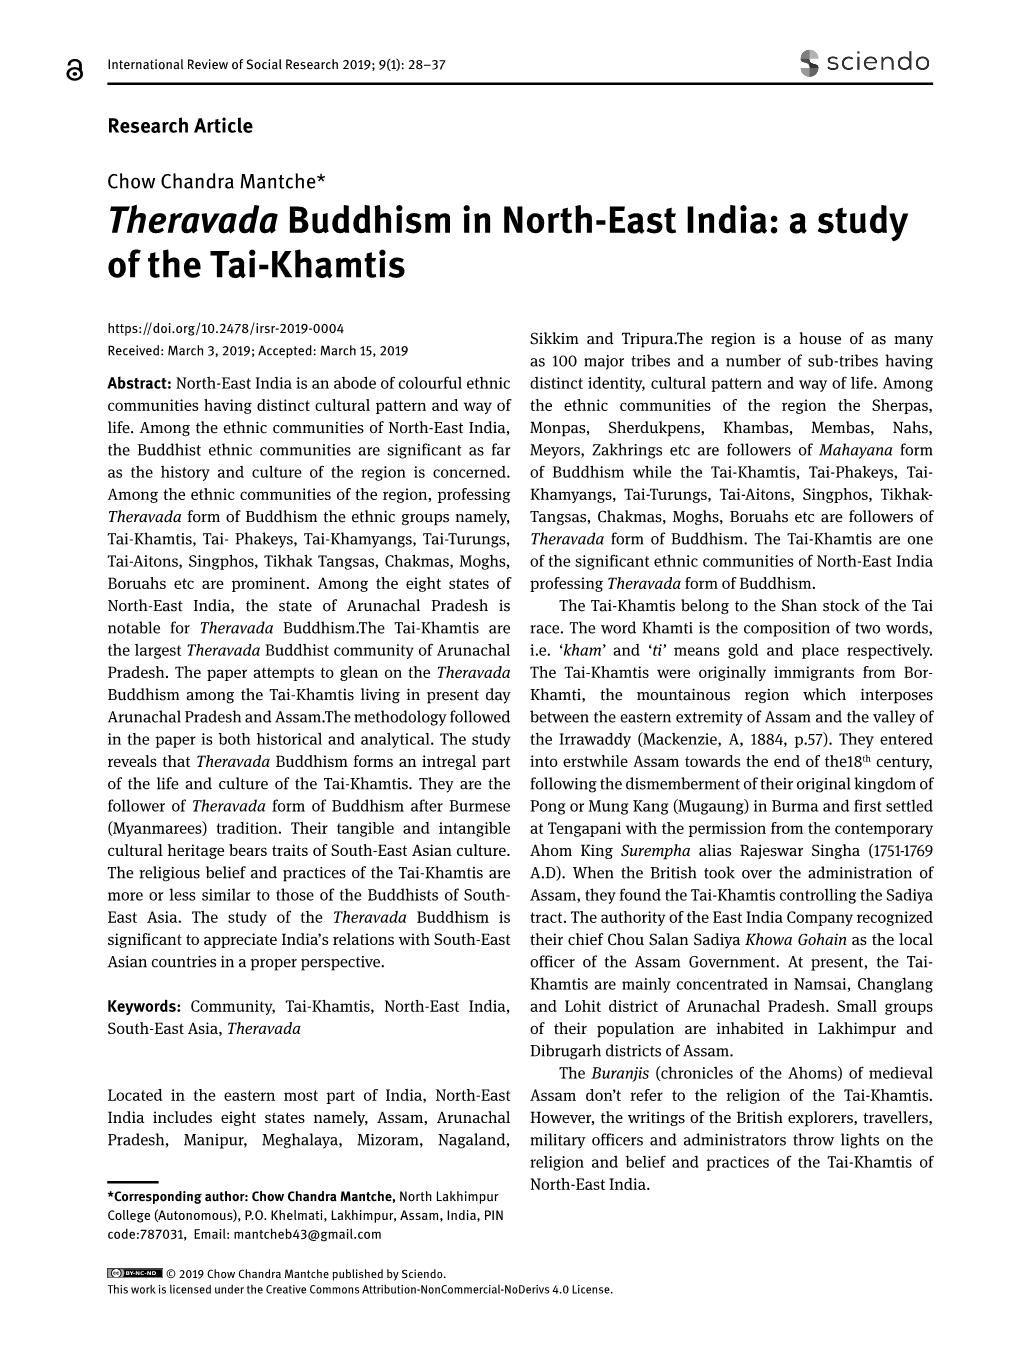 Theravada Buddhism in North-East India